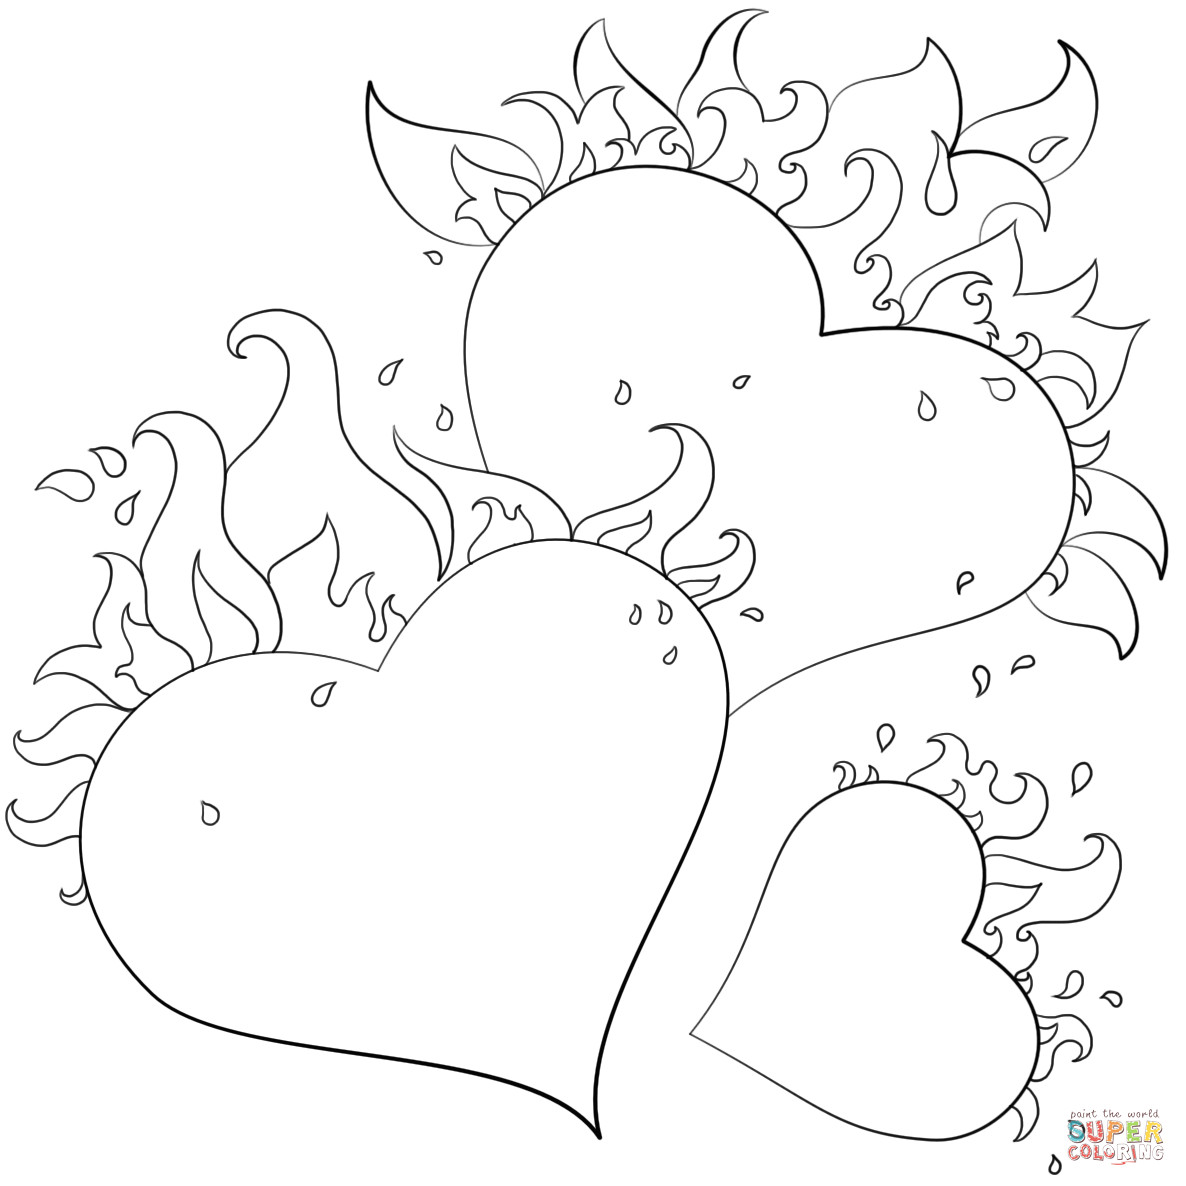 Drawing Of Heart with Flames Hearts with Flames Coloring Page and Heart Pages Coloring Pages